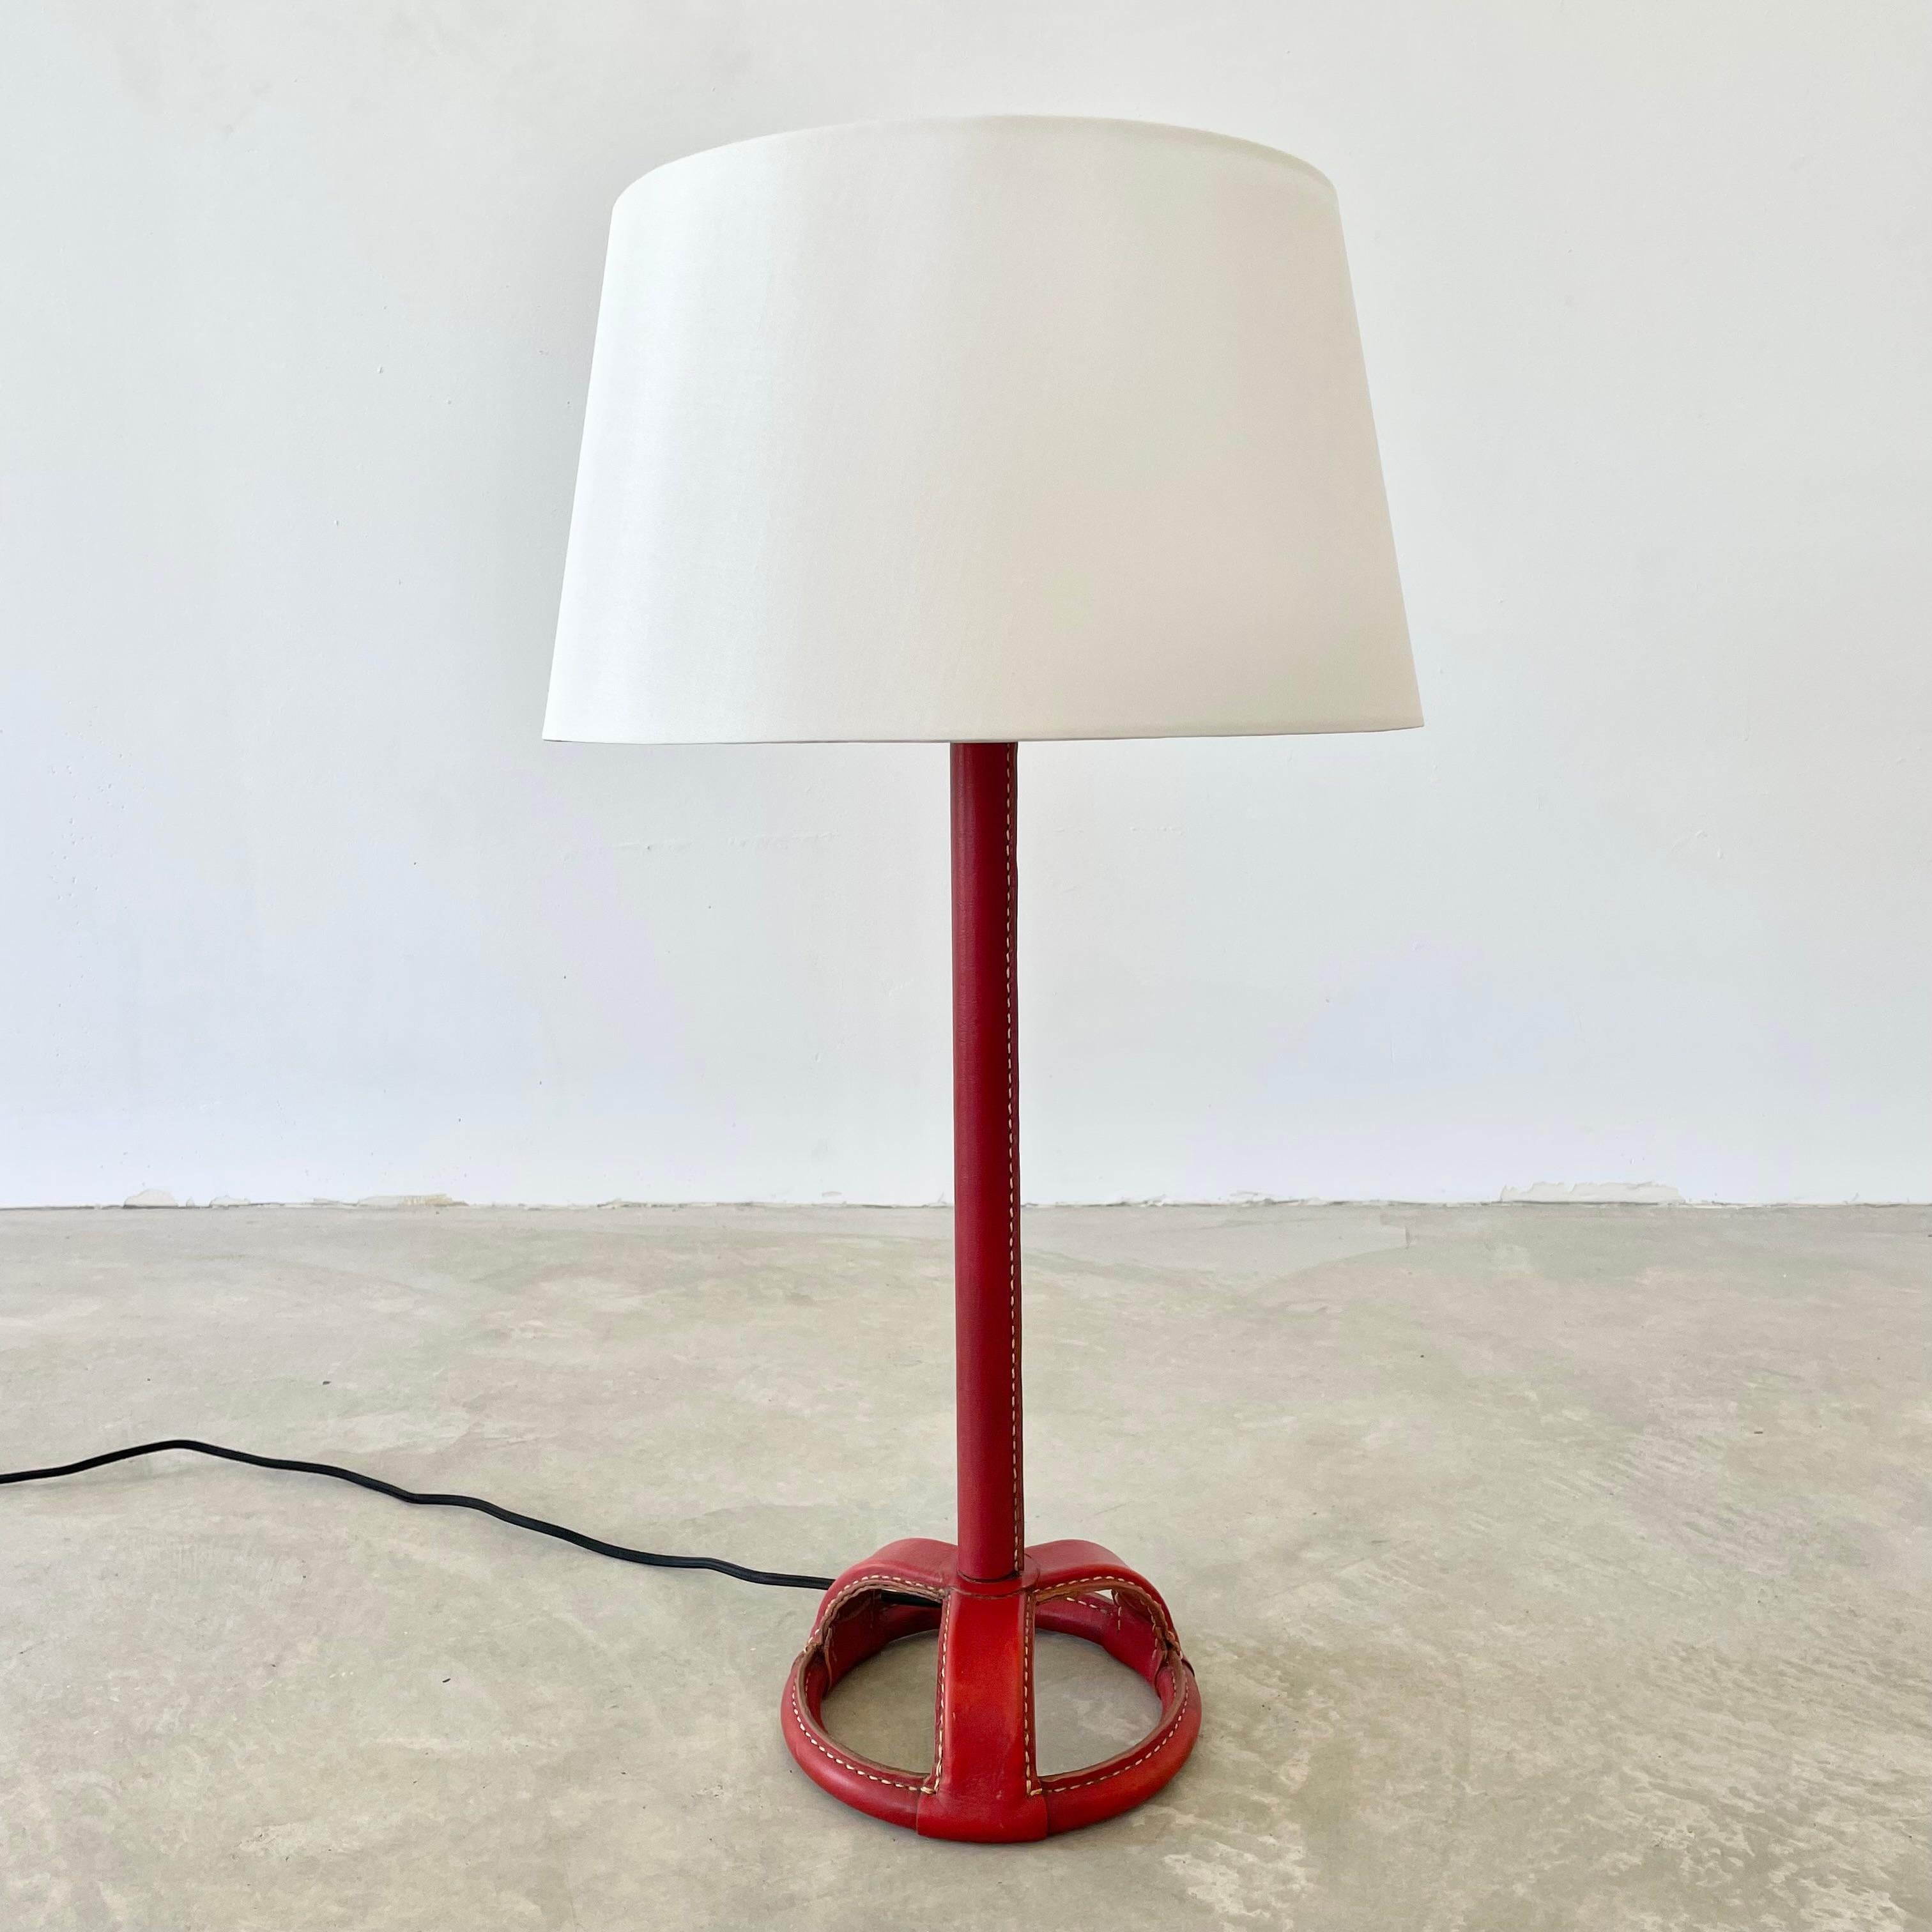 French Jacques Adnet Red Leather Table Lamp, 1950s France